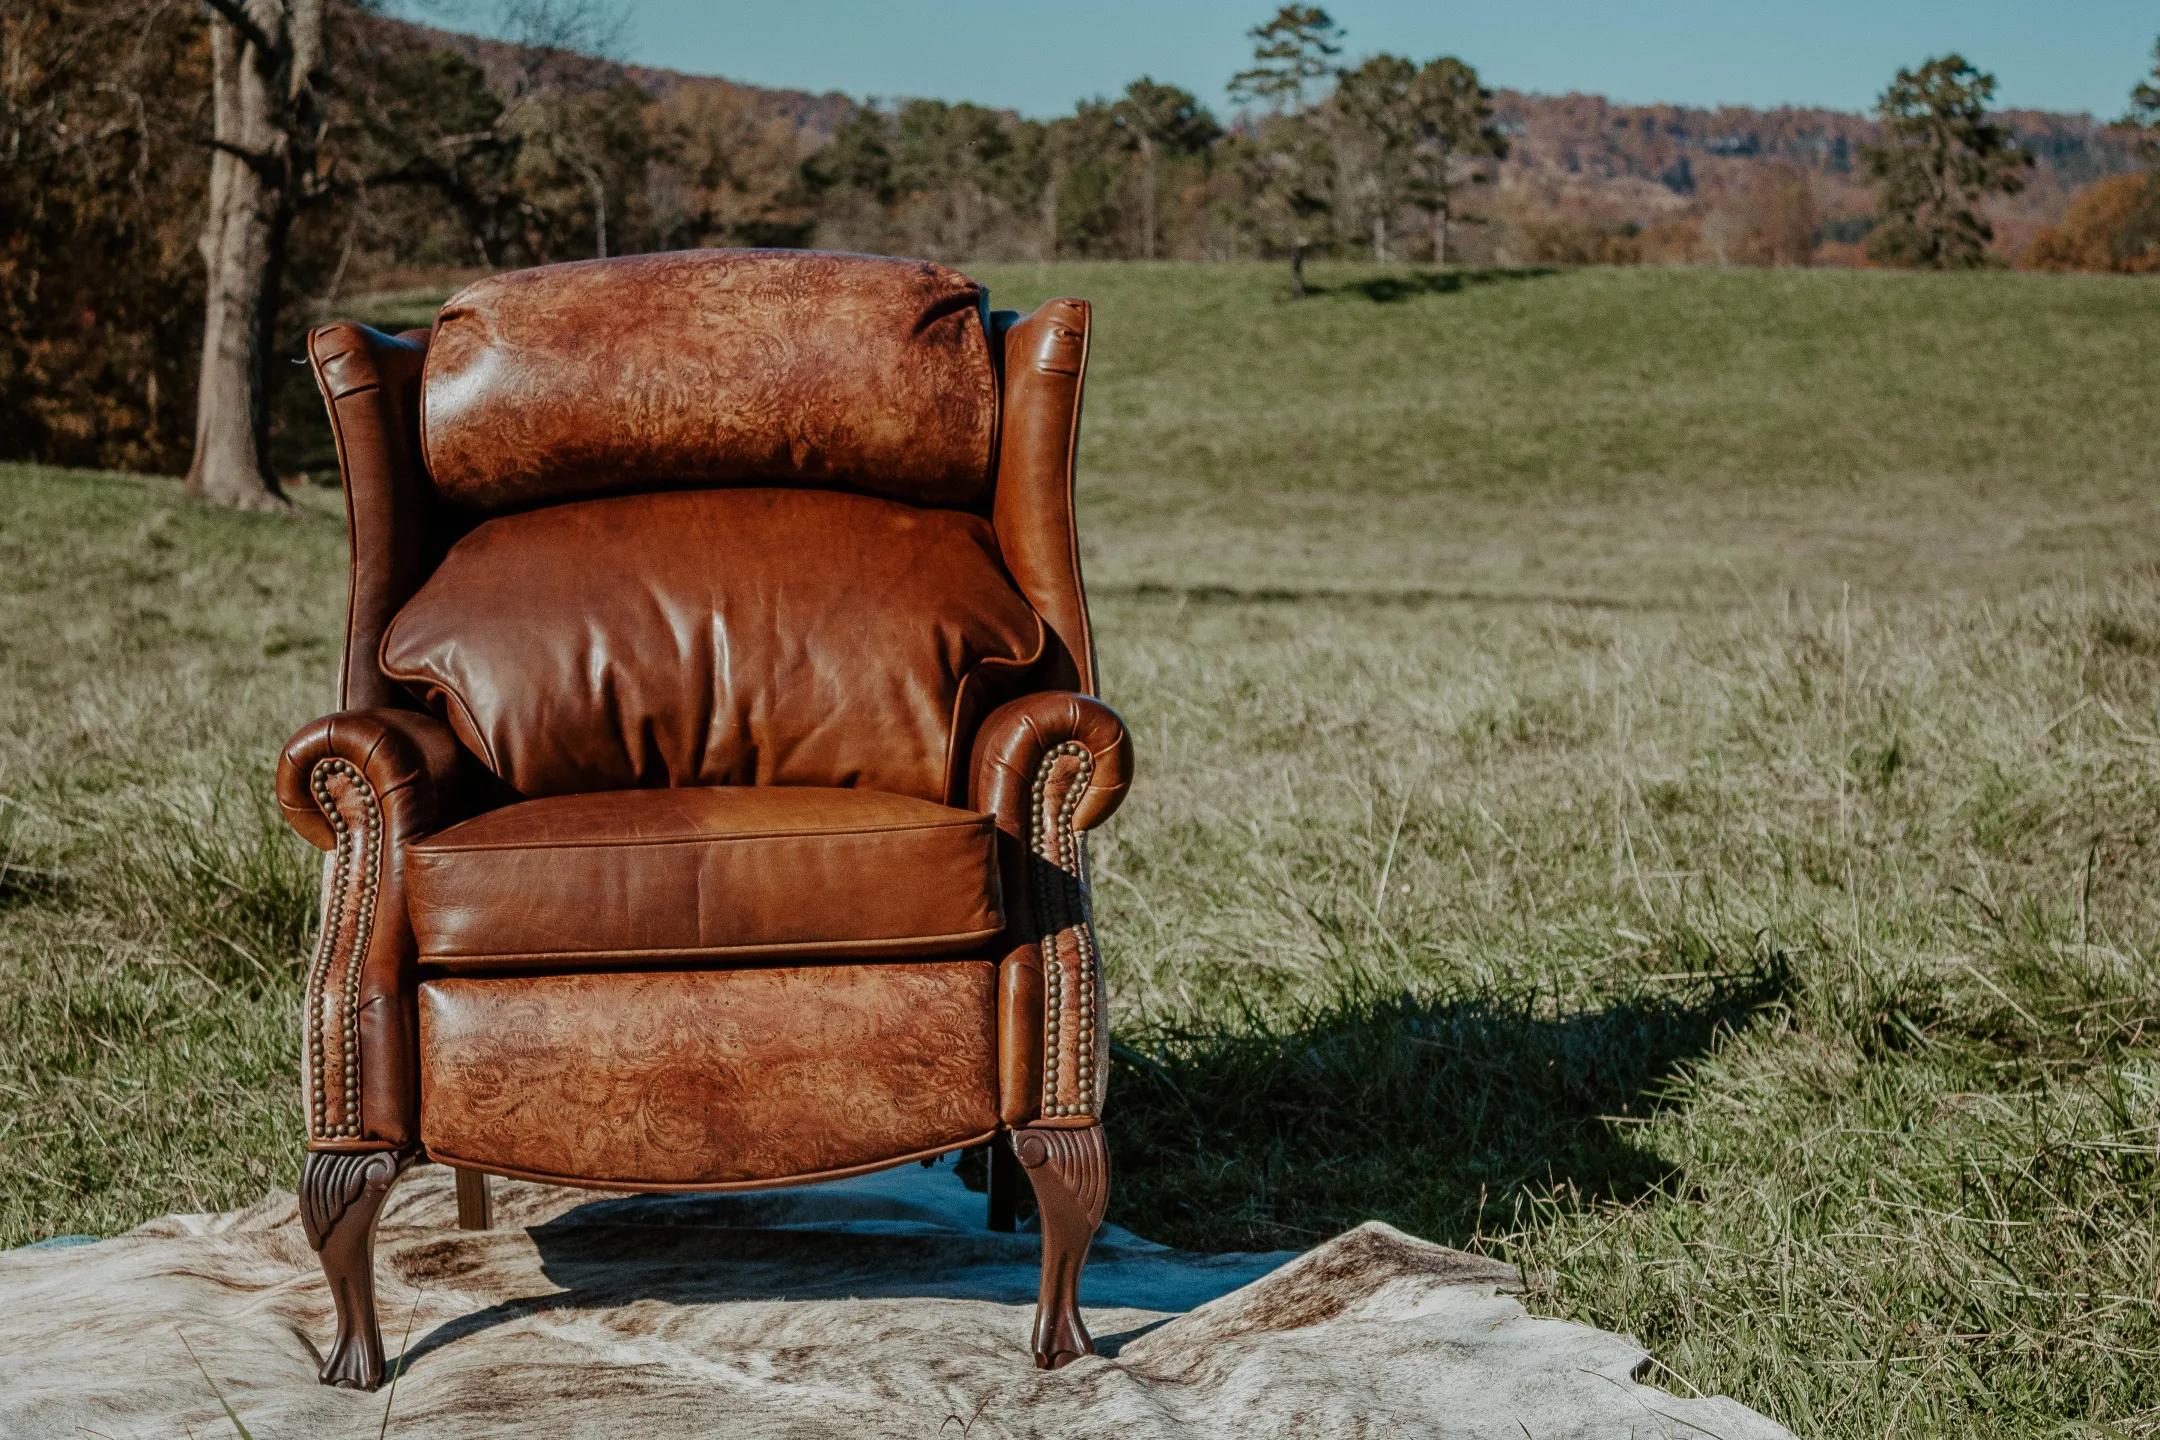 leather chair in field